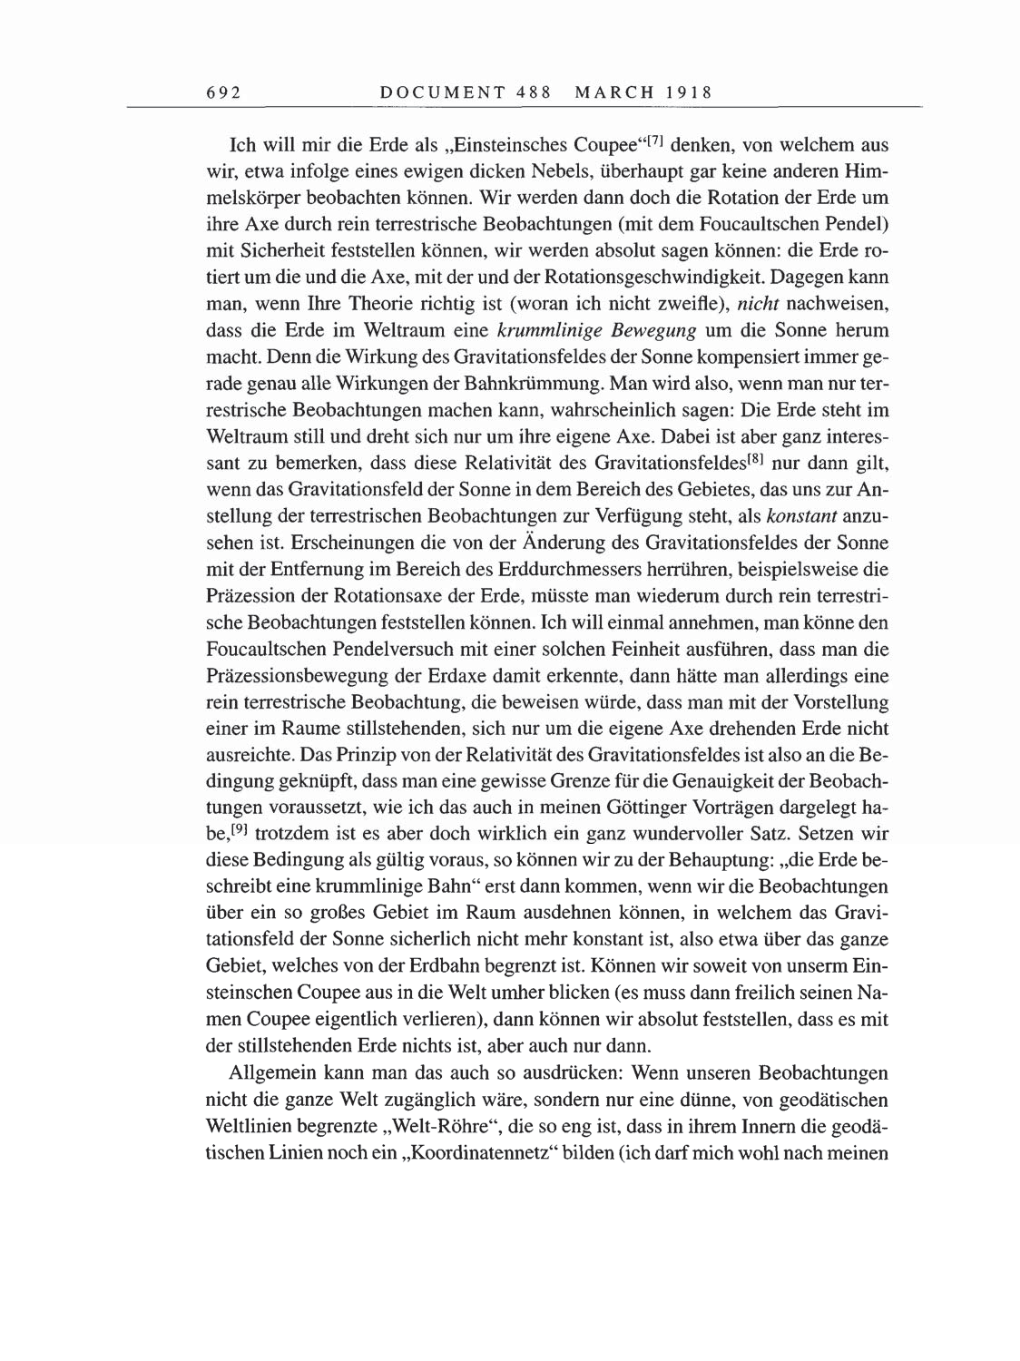 Volume 8, Part B: The Berlin Years: Correspondence 1918 page 692